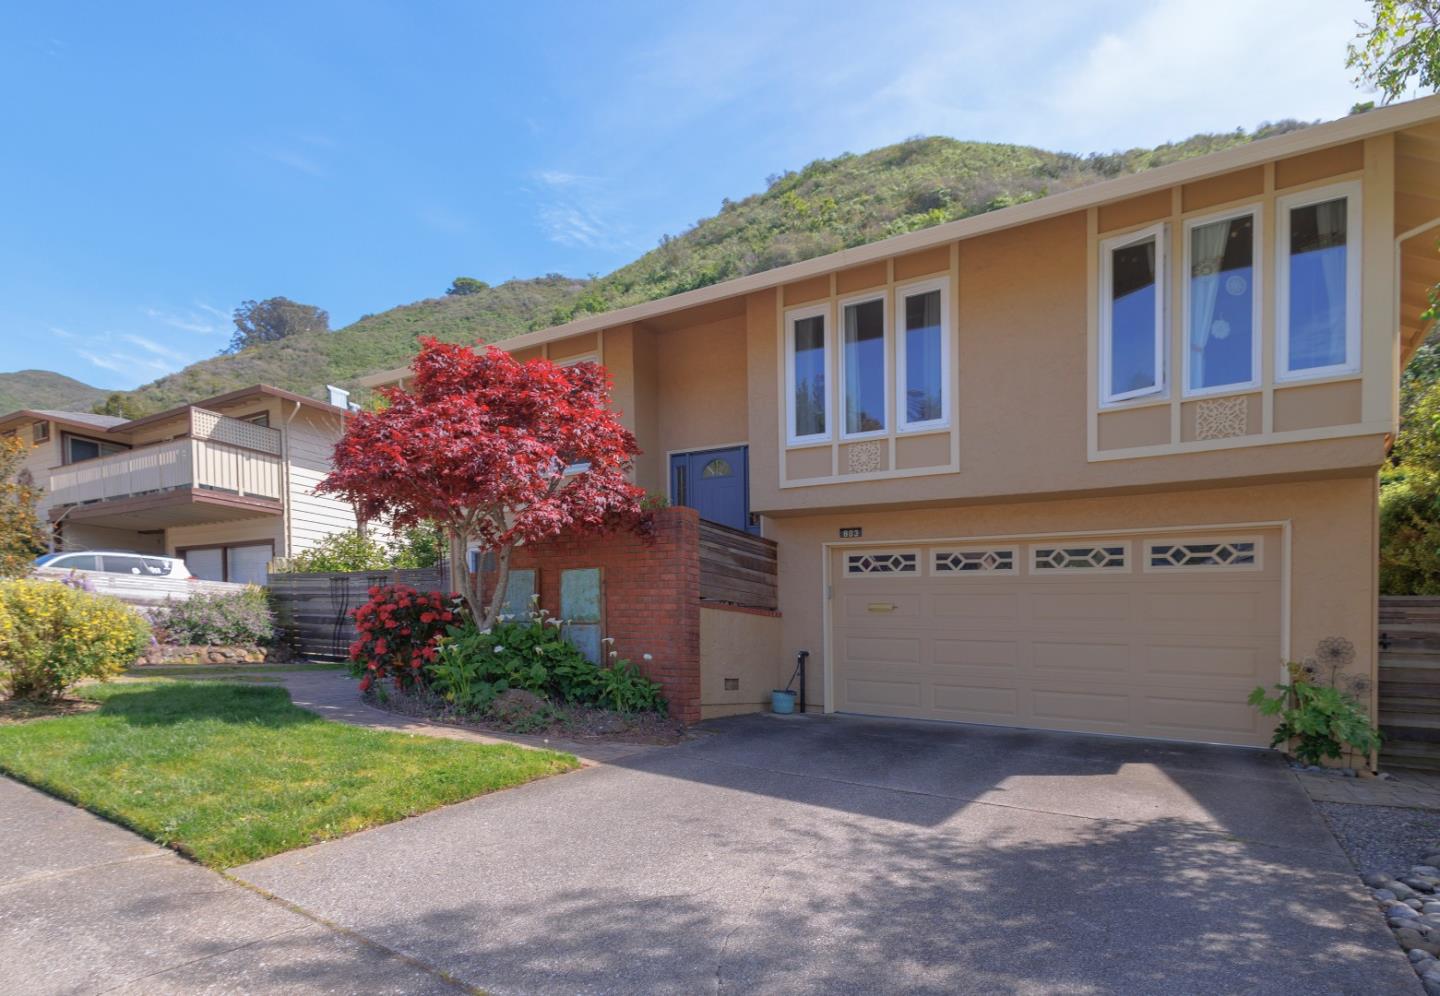 Photo of 803 Big Bend Dr in Pacifica, CA